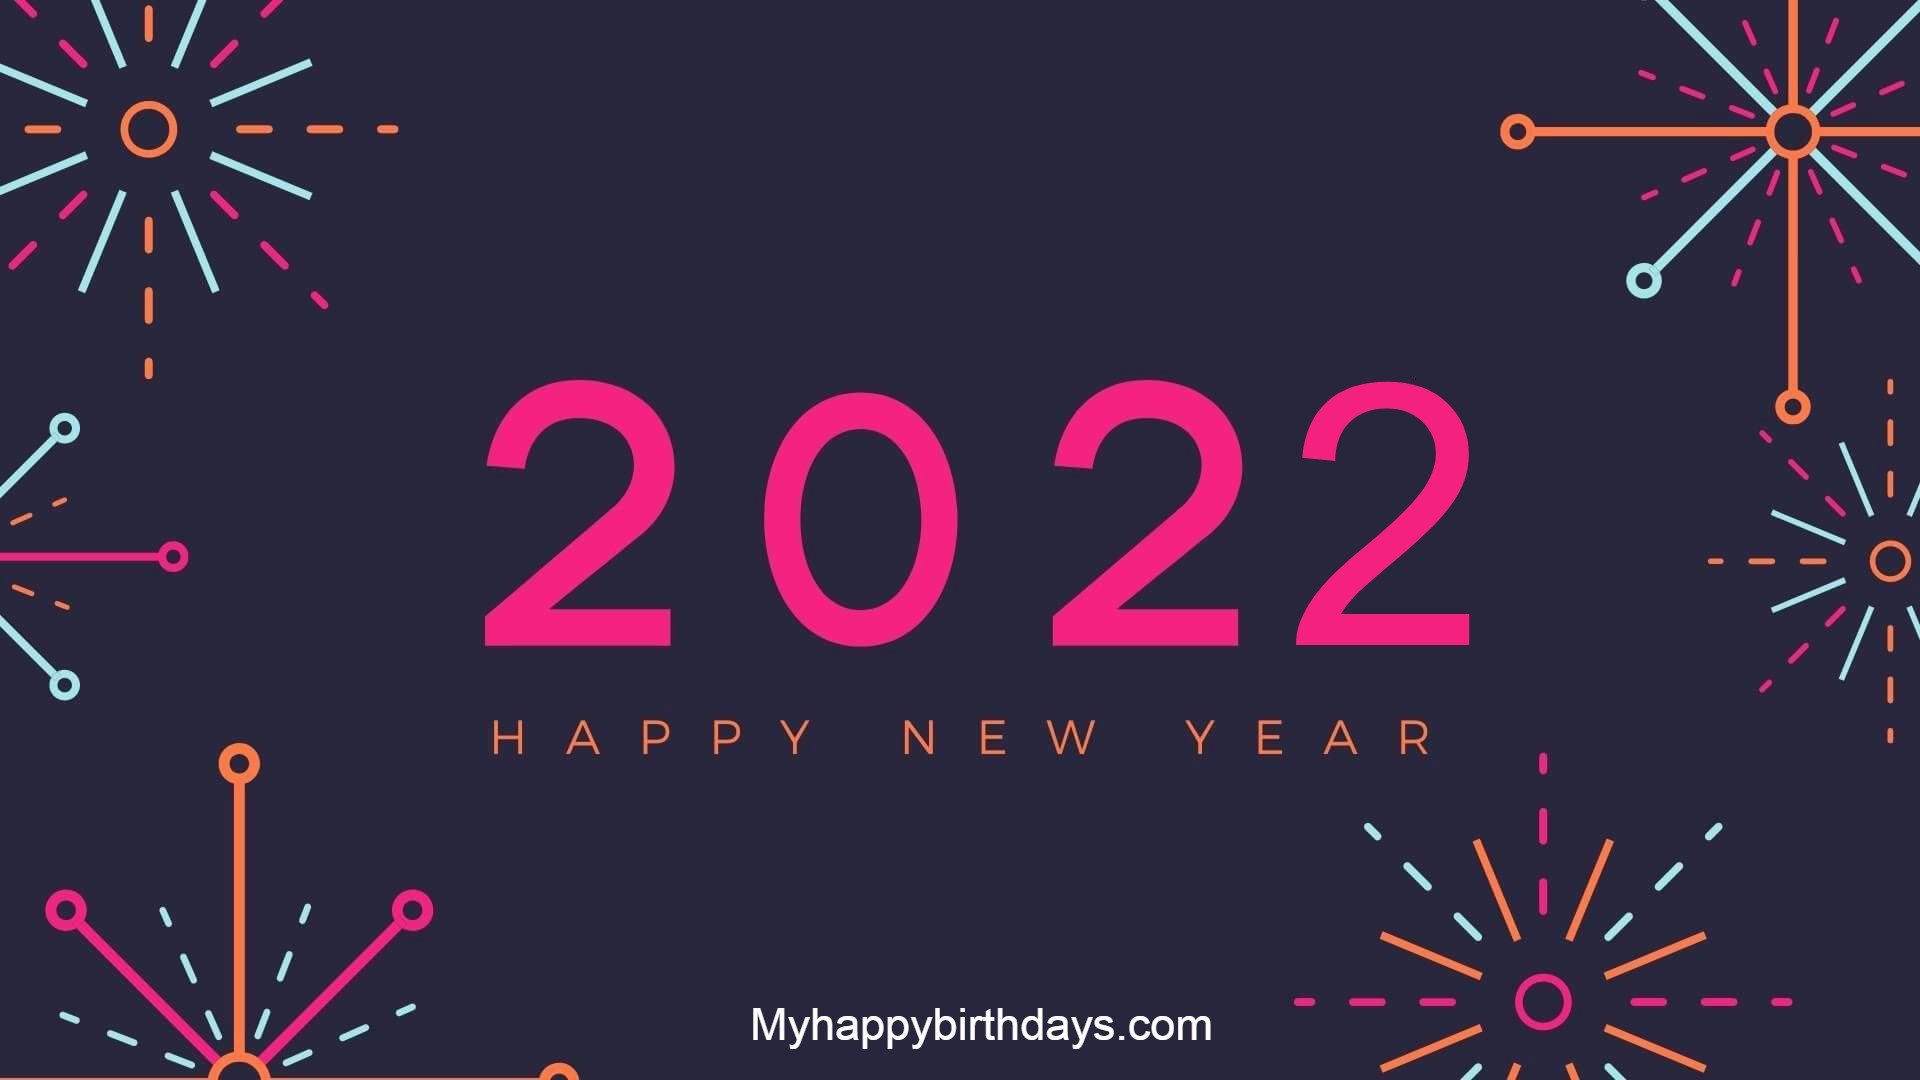 350 Happy New Year Wishes Messages Quotes Images 2022 1920x1080